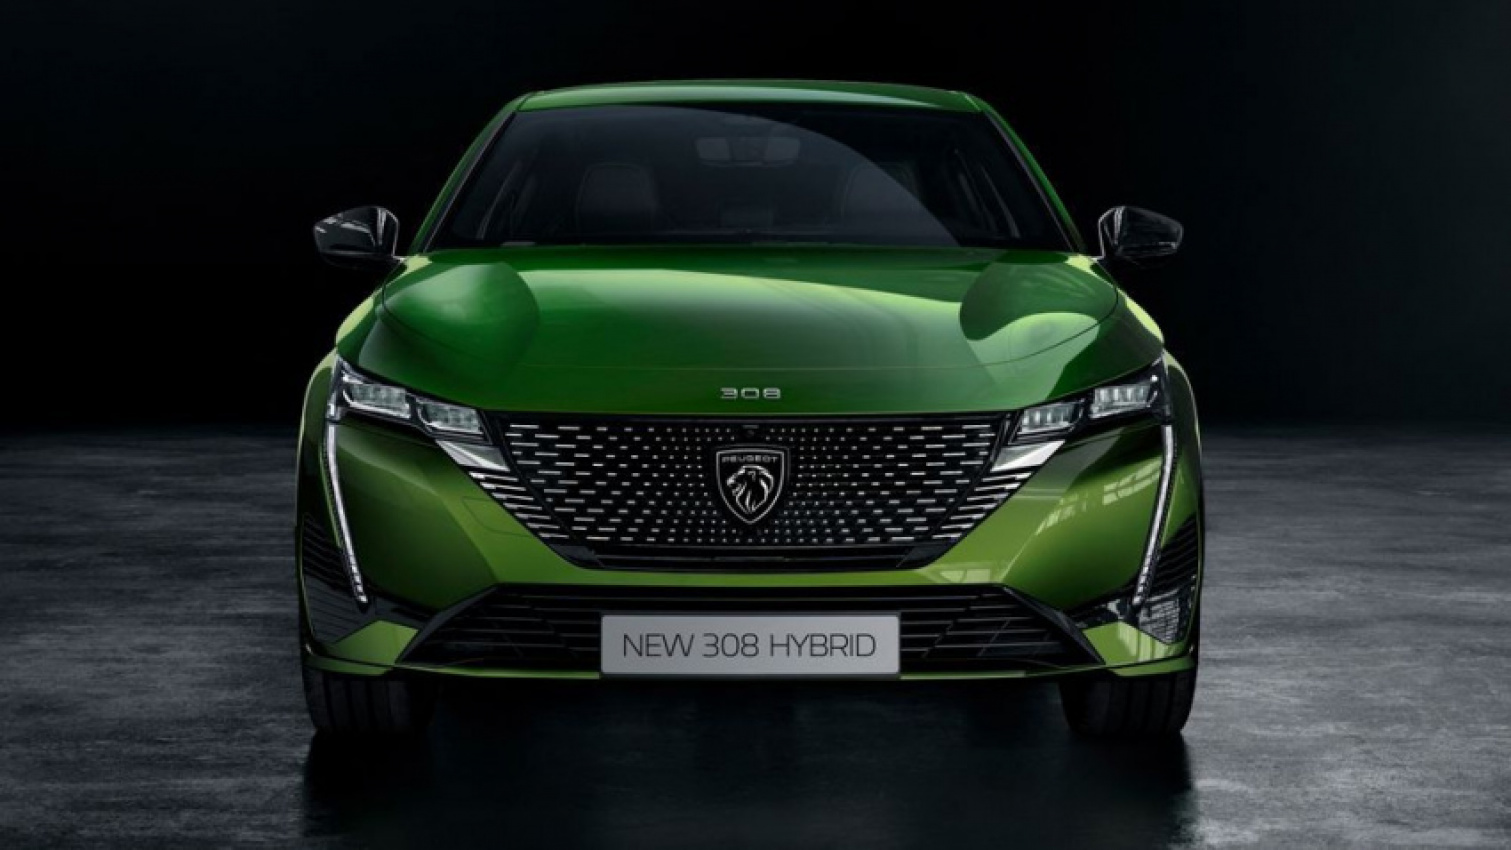 autos, cars, geo, peugeot, auto news, bauto, bermaz, emp2, gt, hatch, hybrid, i-cockpit, phev, puretech, peugeot reveals the all-new 2022 308 hatch in all its sexy green glory